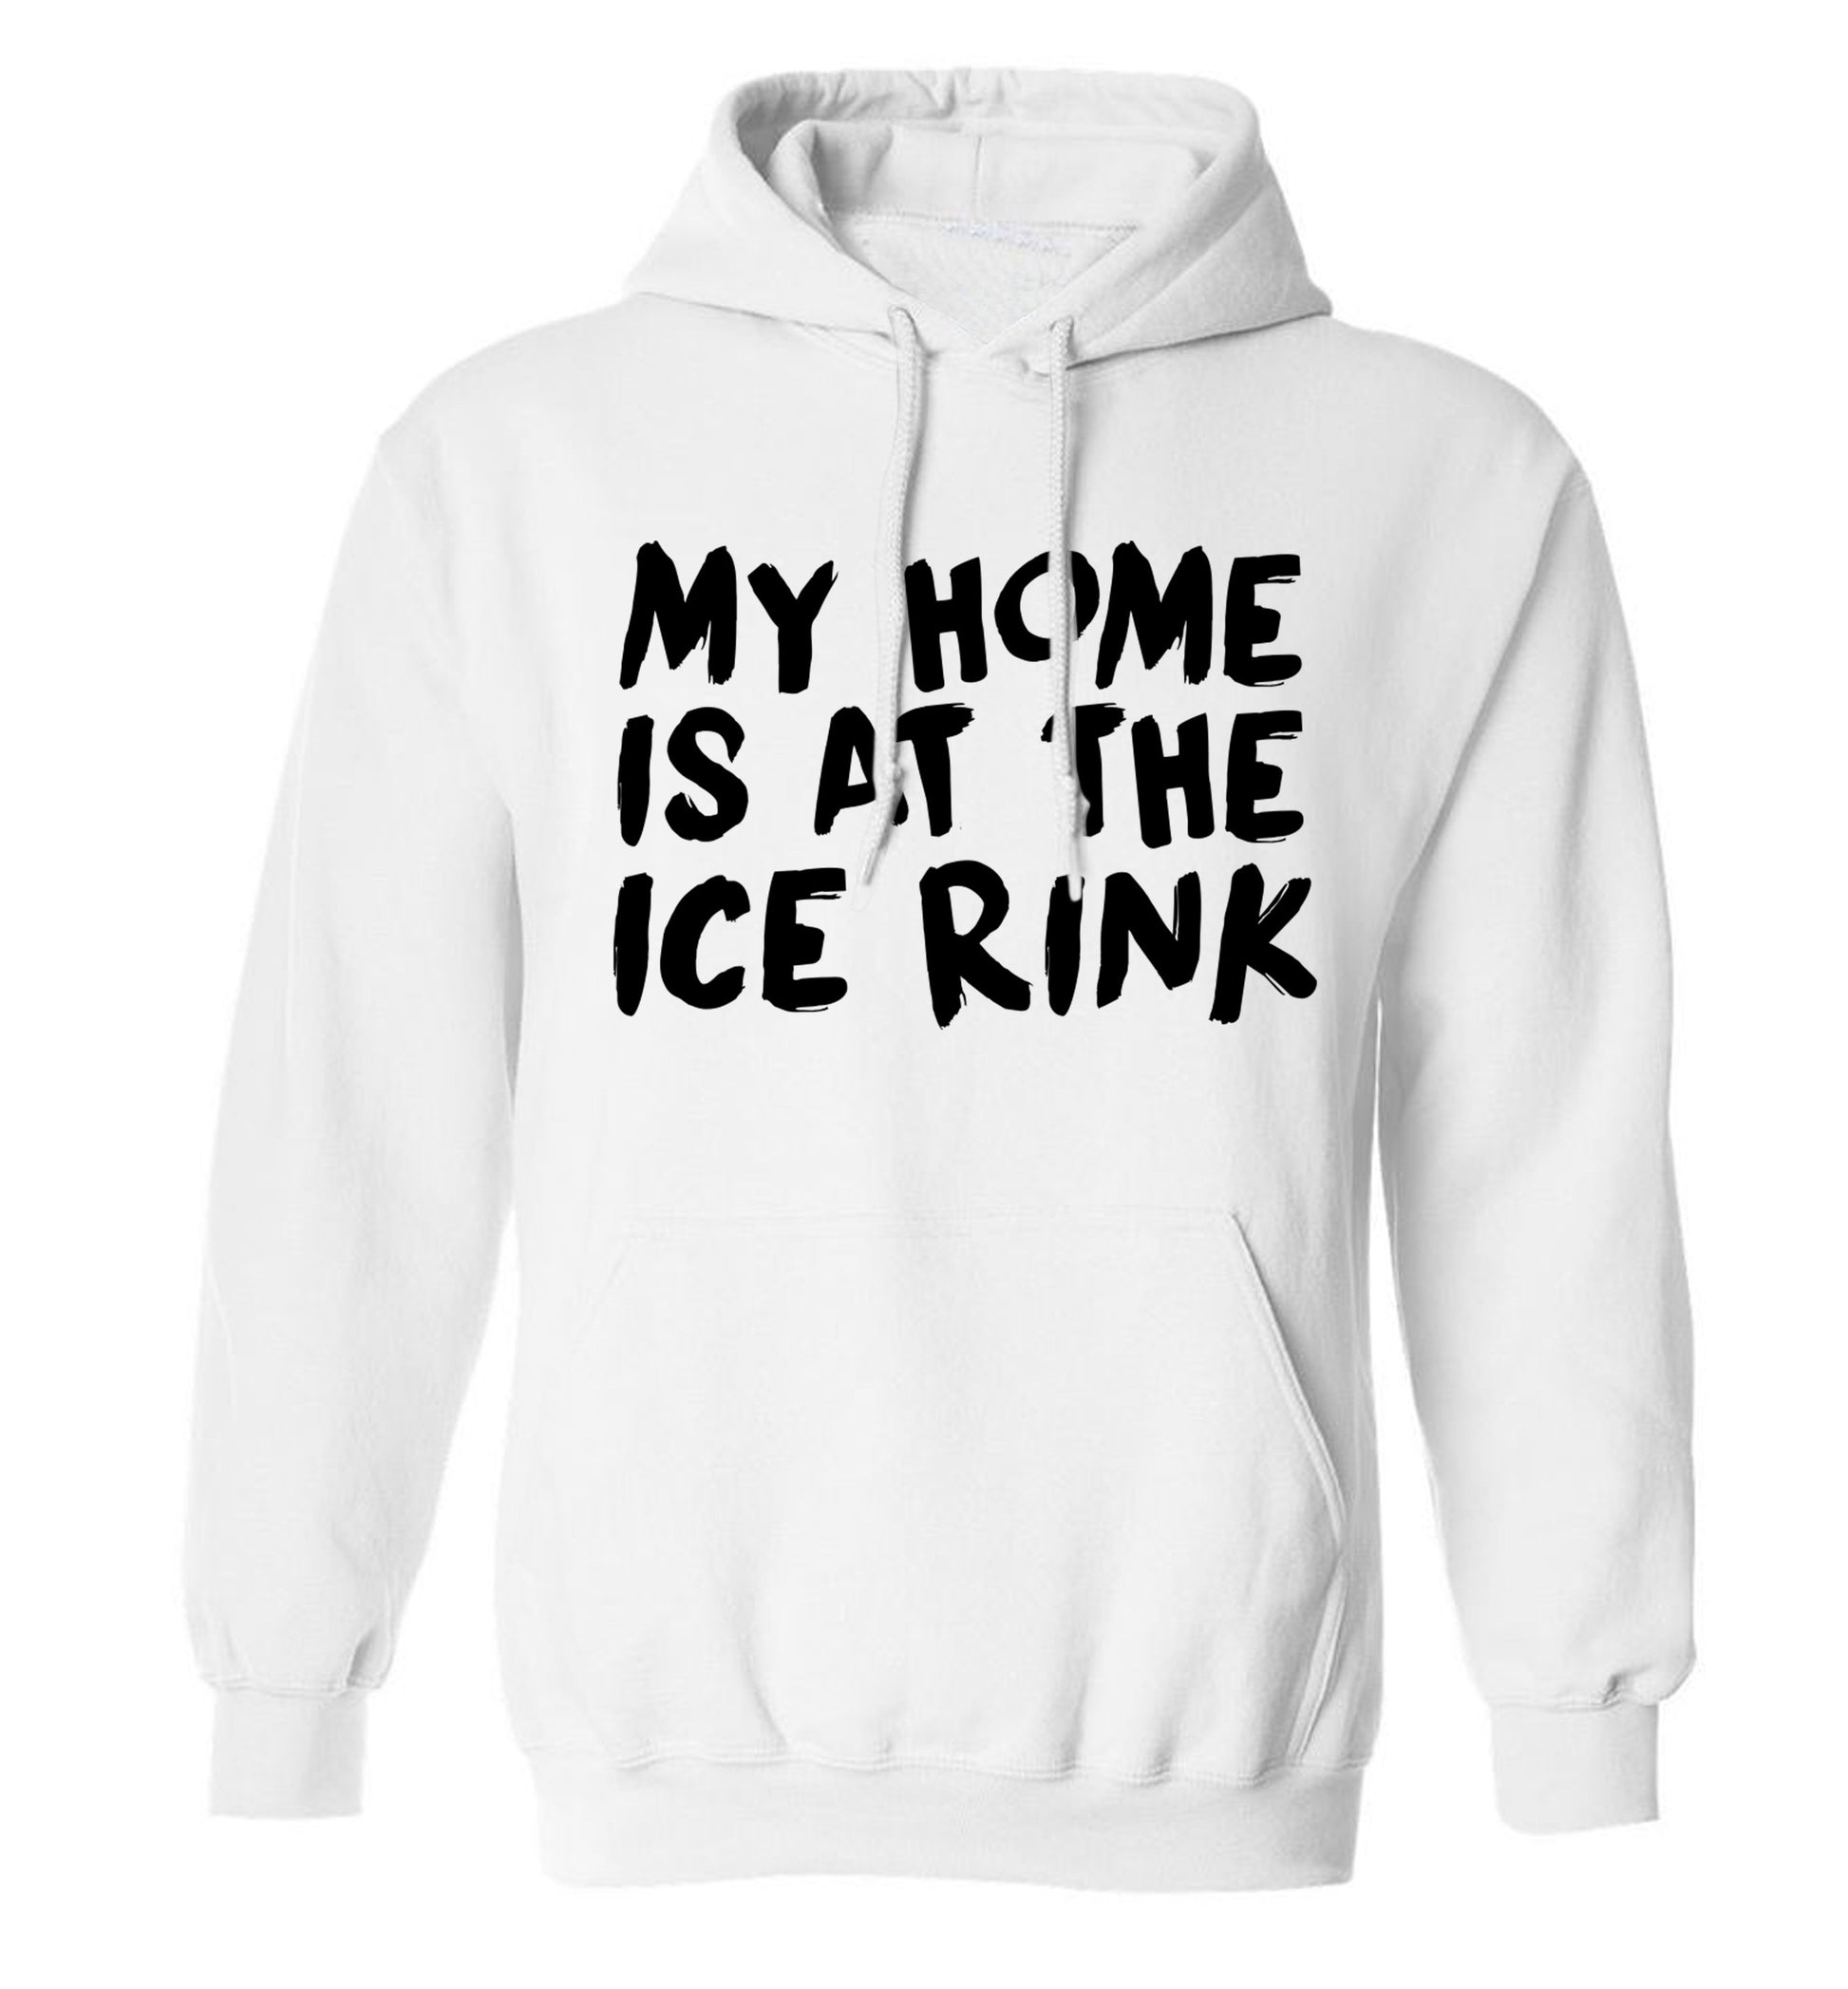 My home is at the ice rink adults unisex white hoodie 2XL